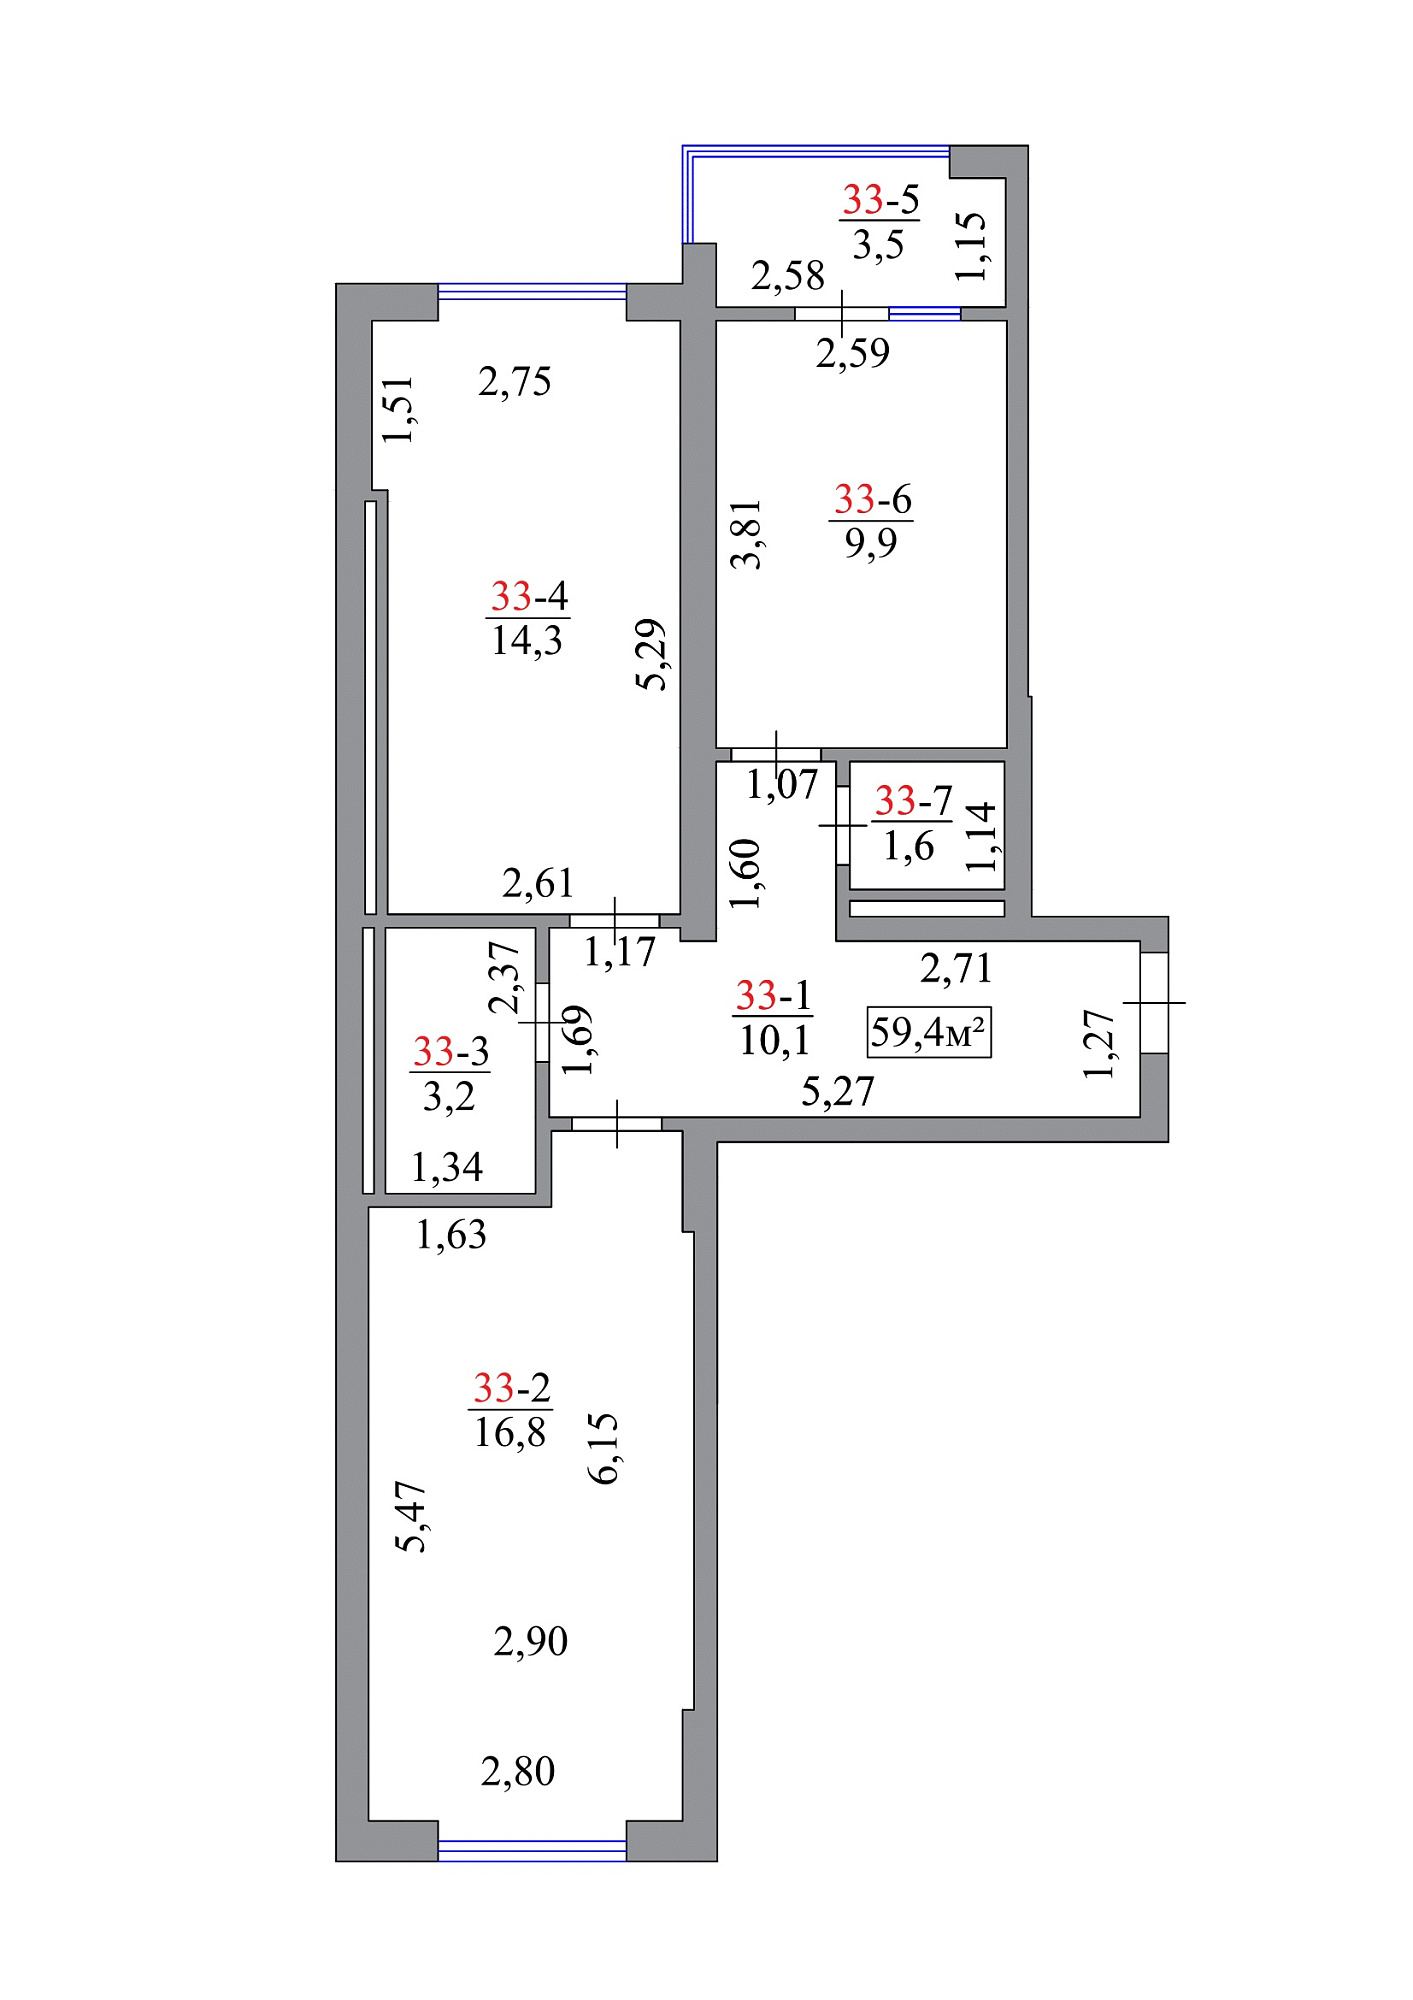 Planning 2-rm flats area 59.4m2, AB-07-04/00030.